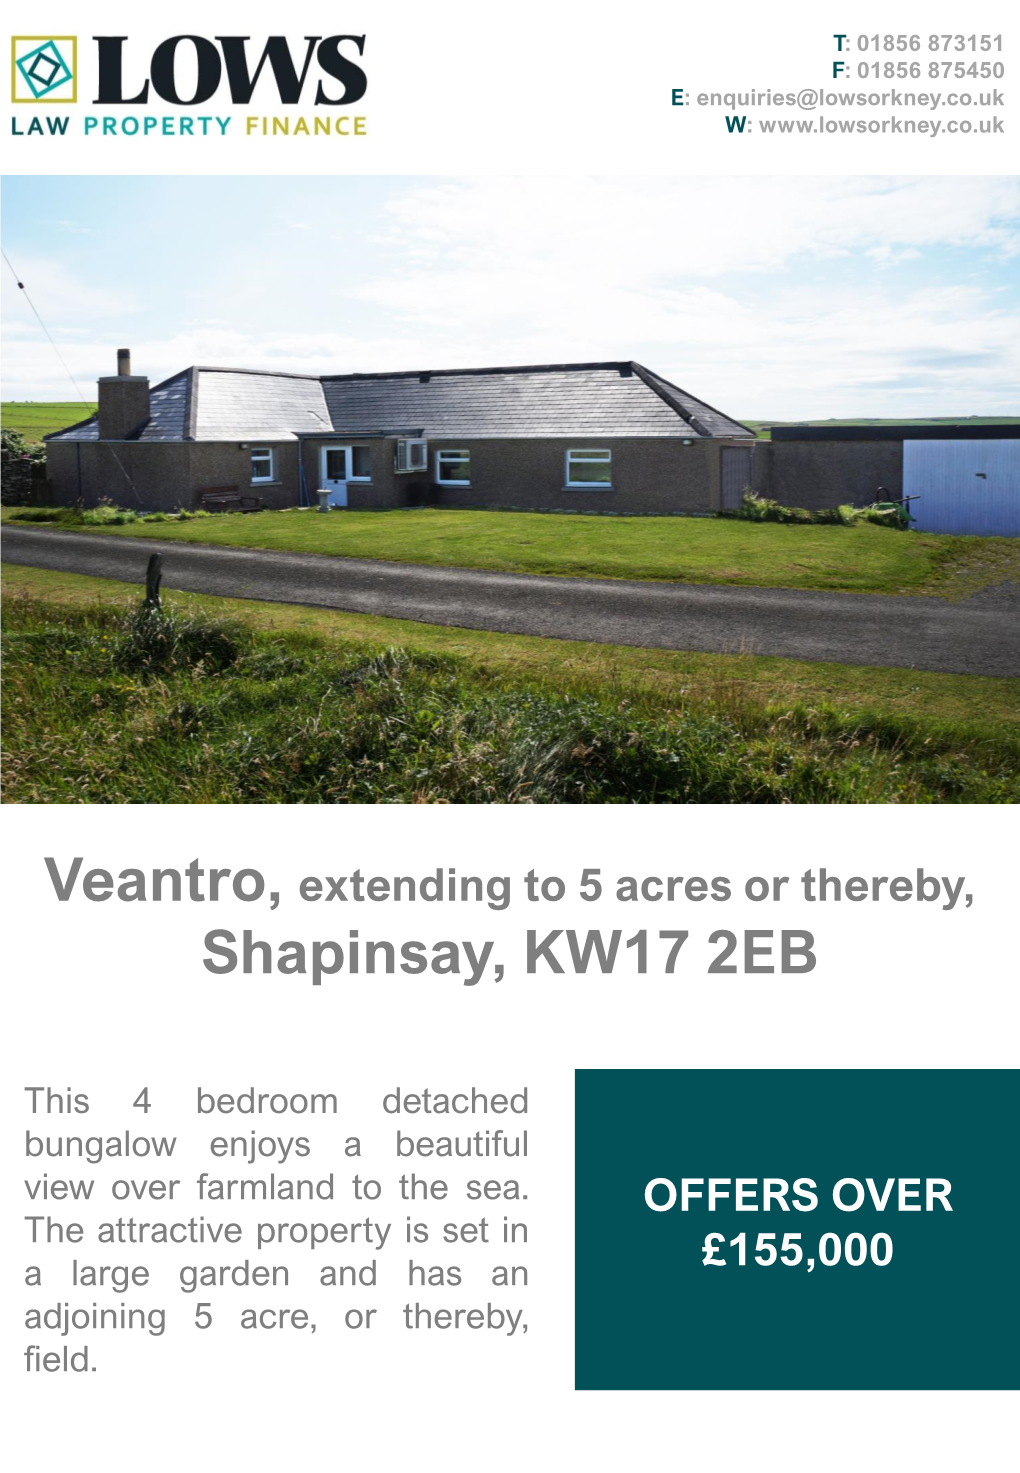 Veantro, Extending to 5 Acres Or Thereby, Shapinsay, KW17 2EB